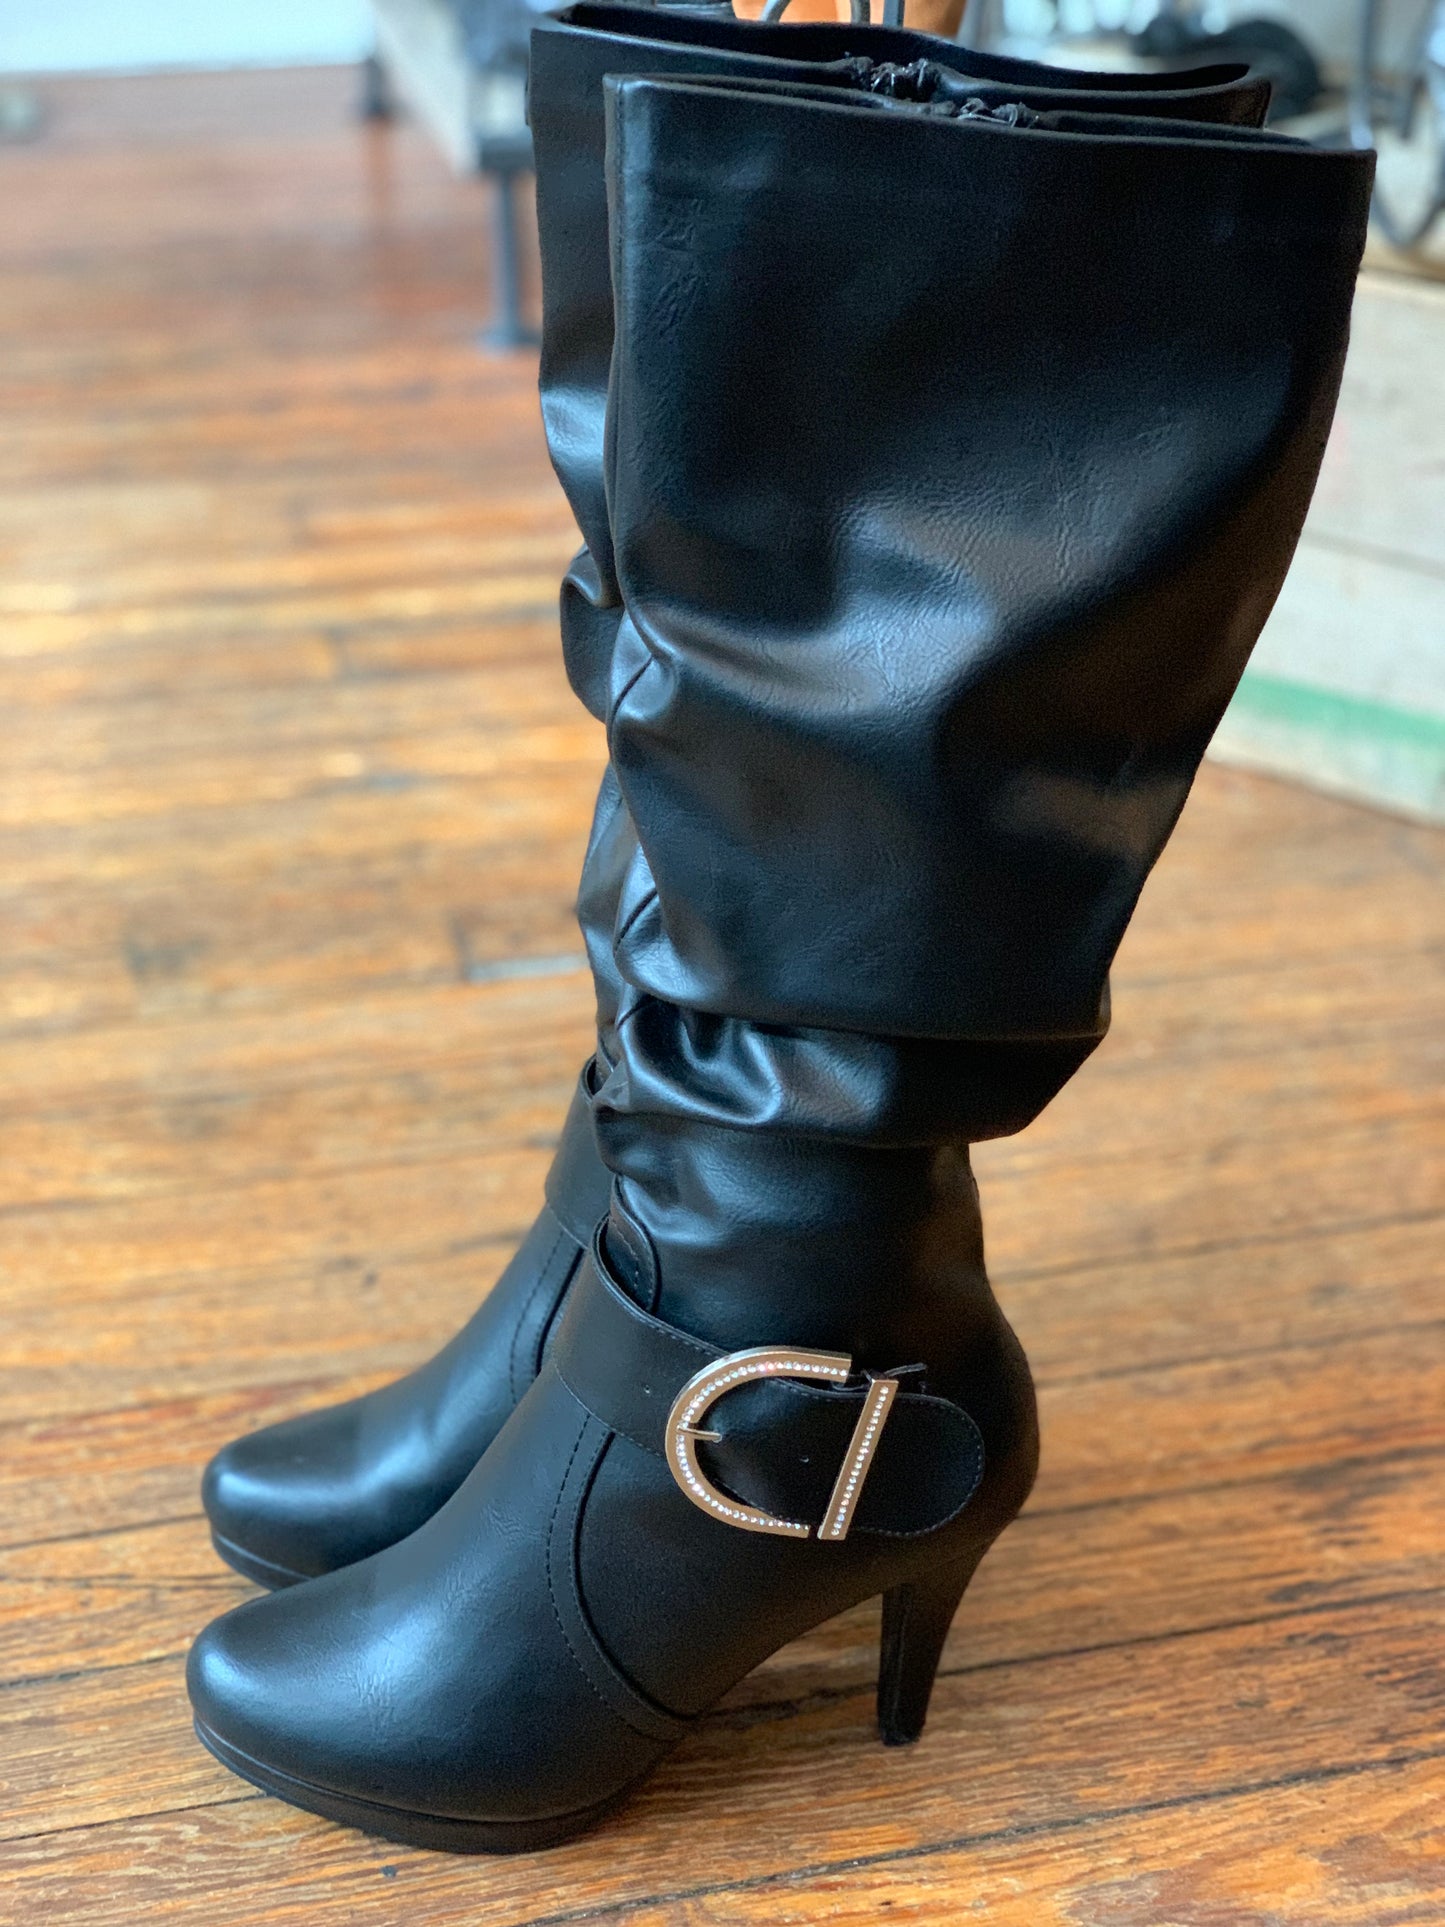 Black Vegan Leather High Heeled Faux Fur Lined Rhinestone Buckle Tall Boots